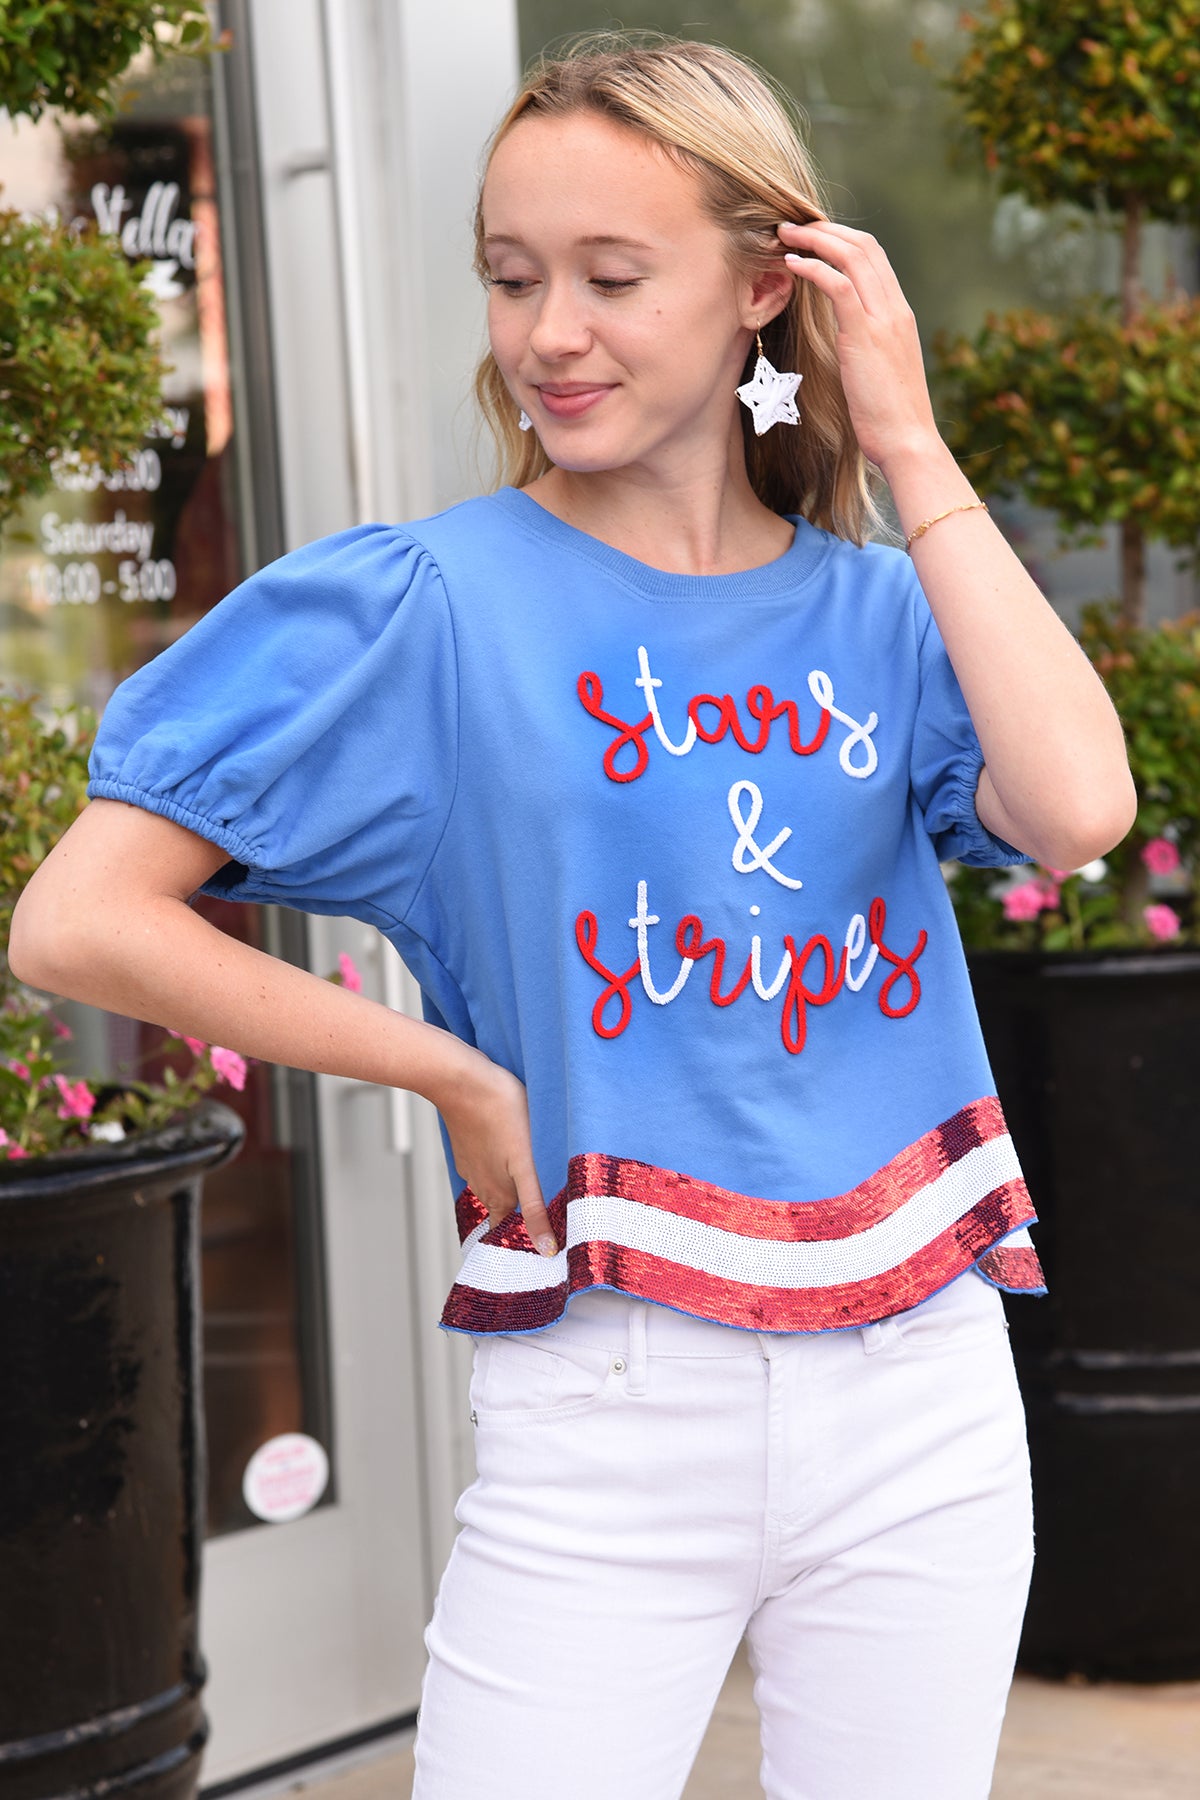 STARS AND STRIPES TOP -BLUE